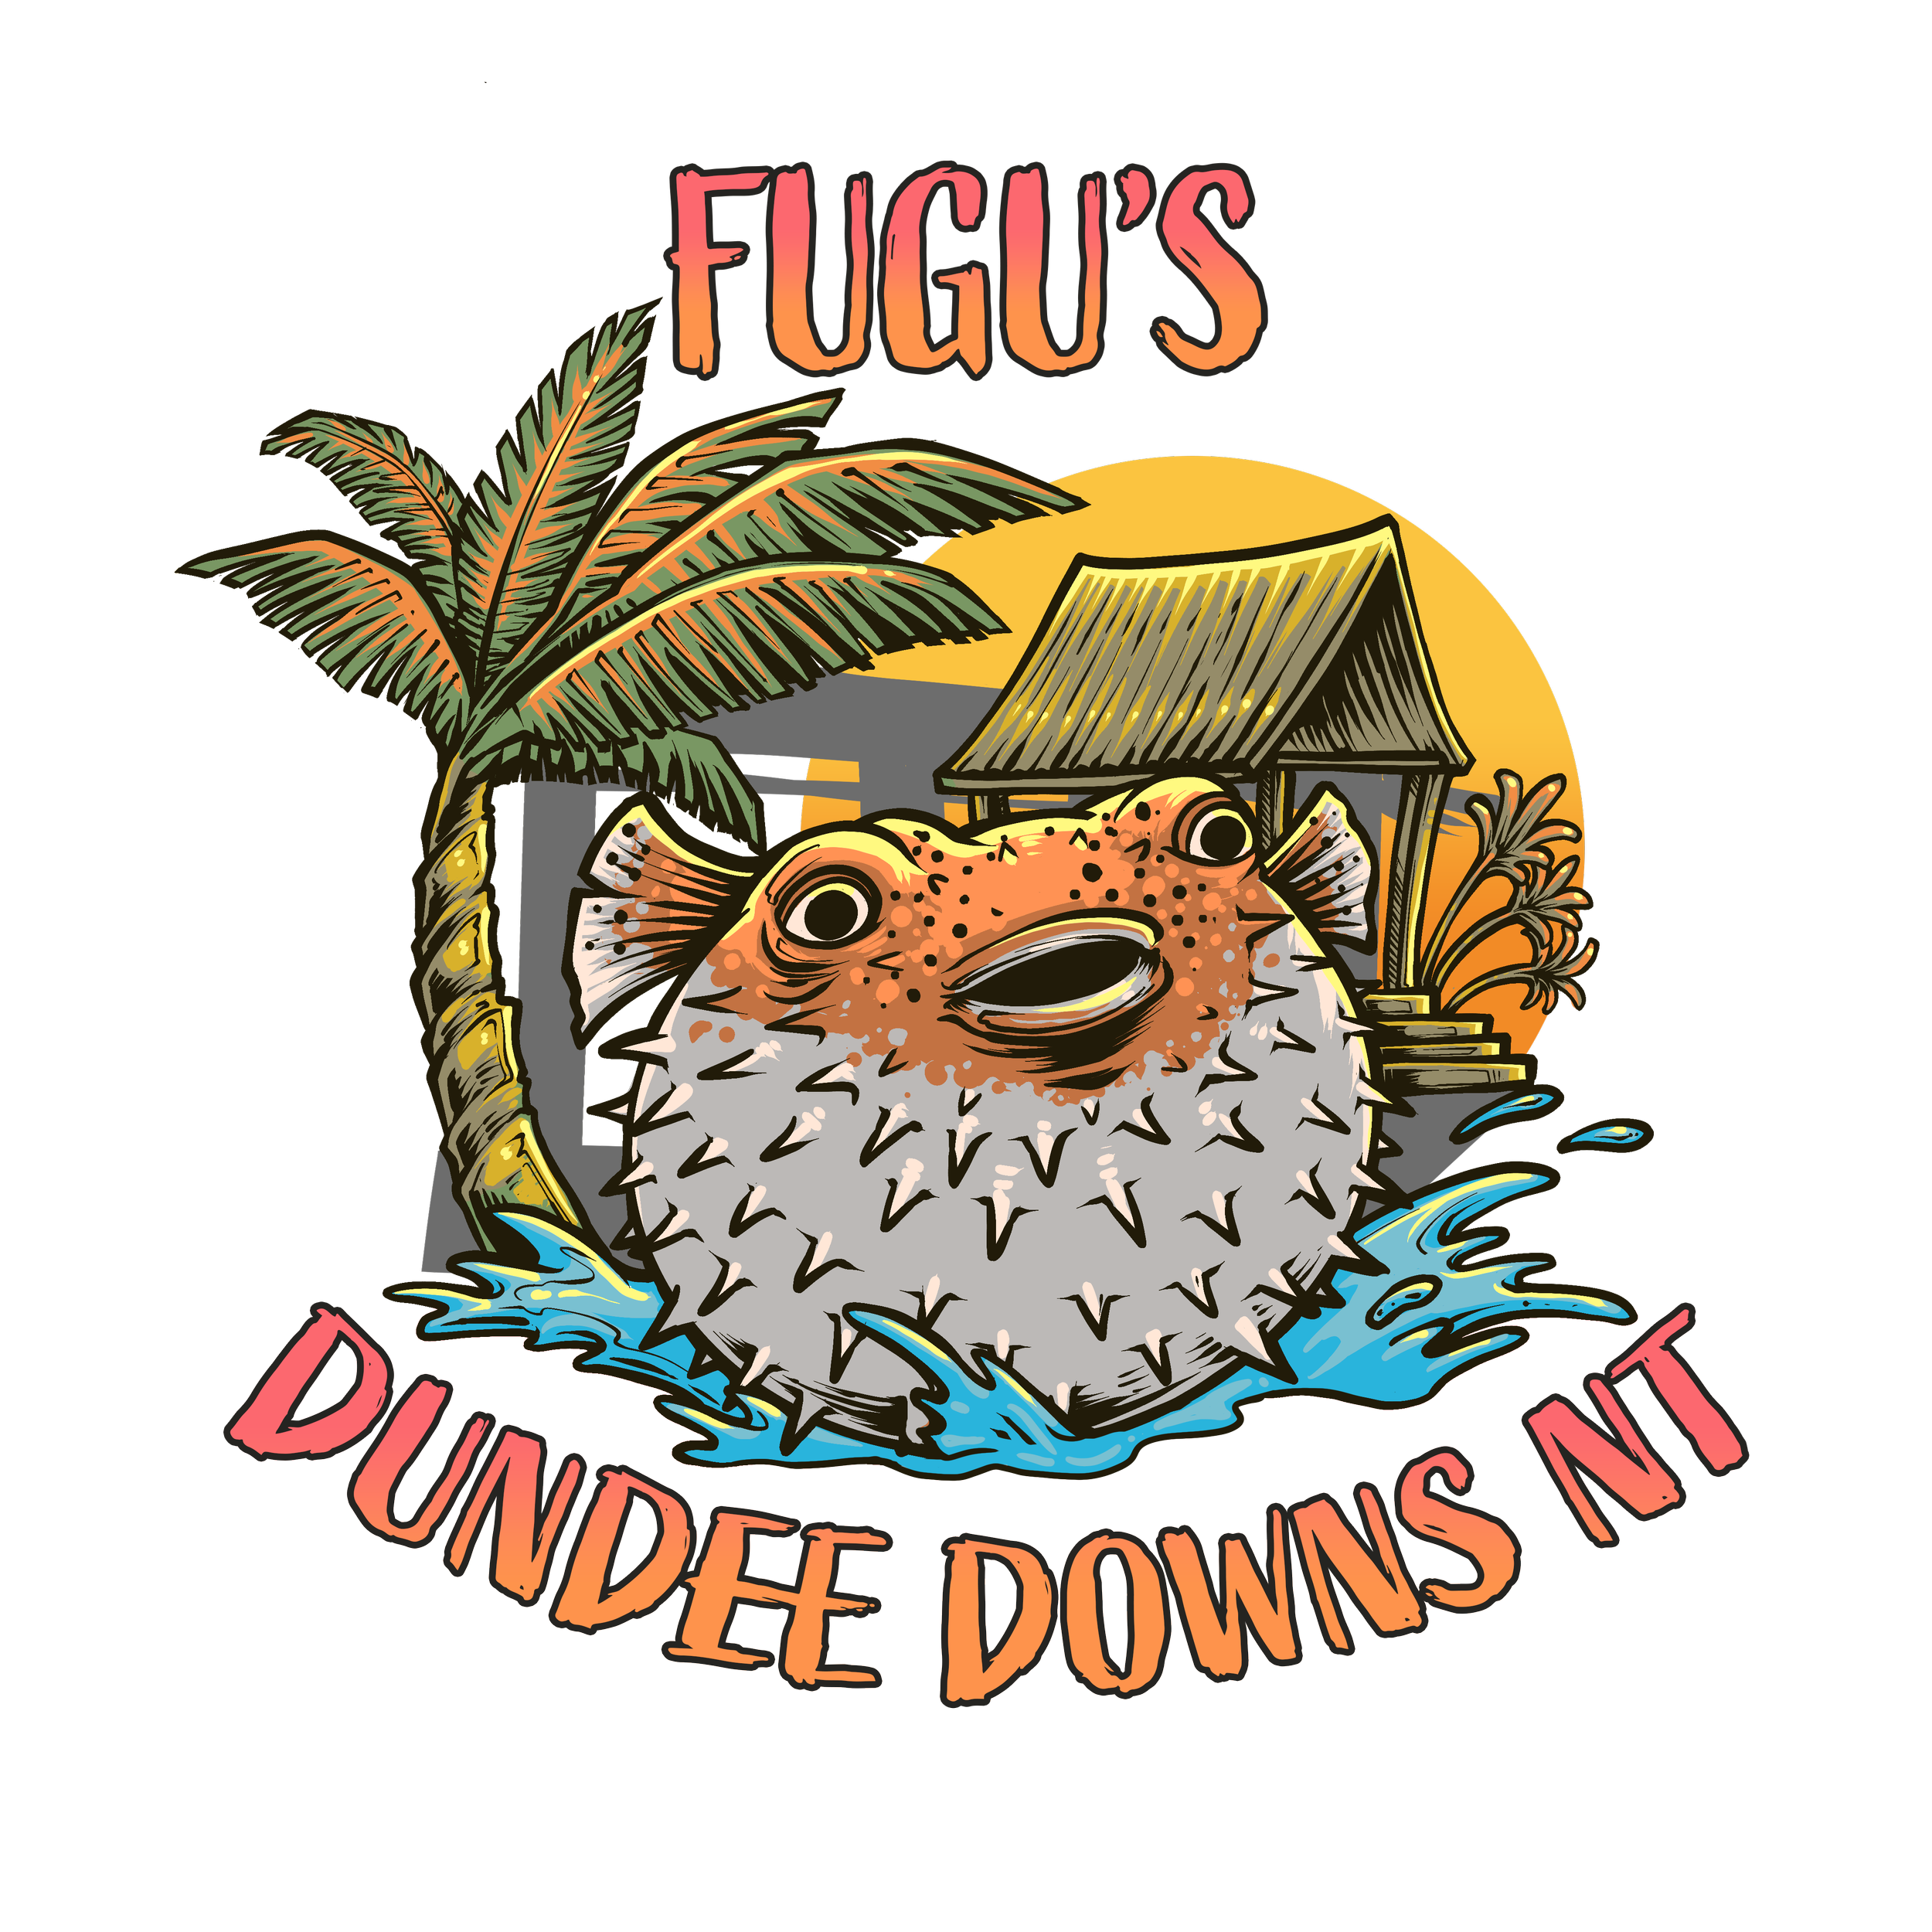 Fugu's Dundee Downs NT